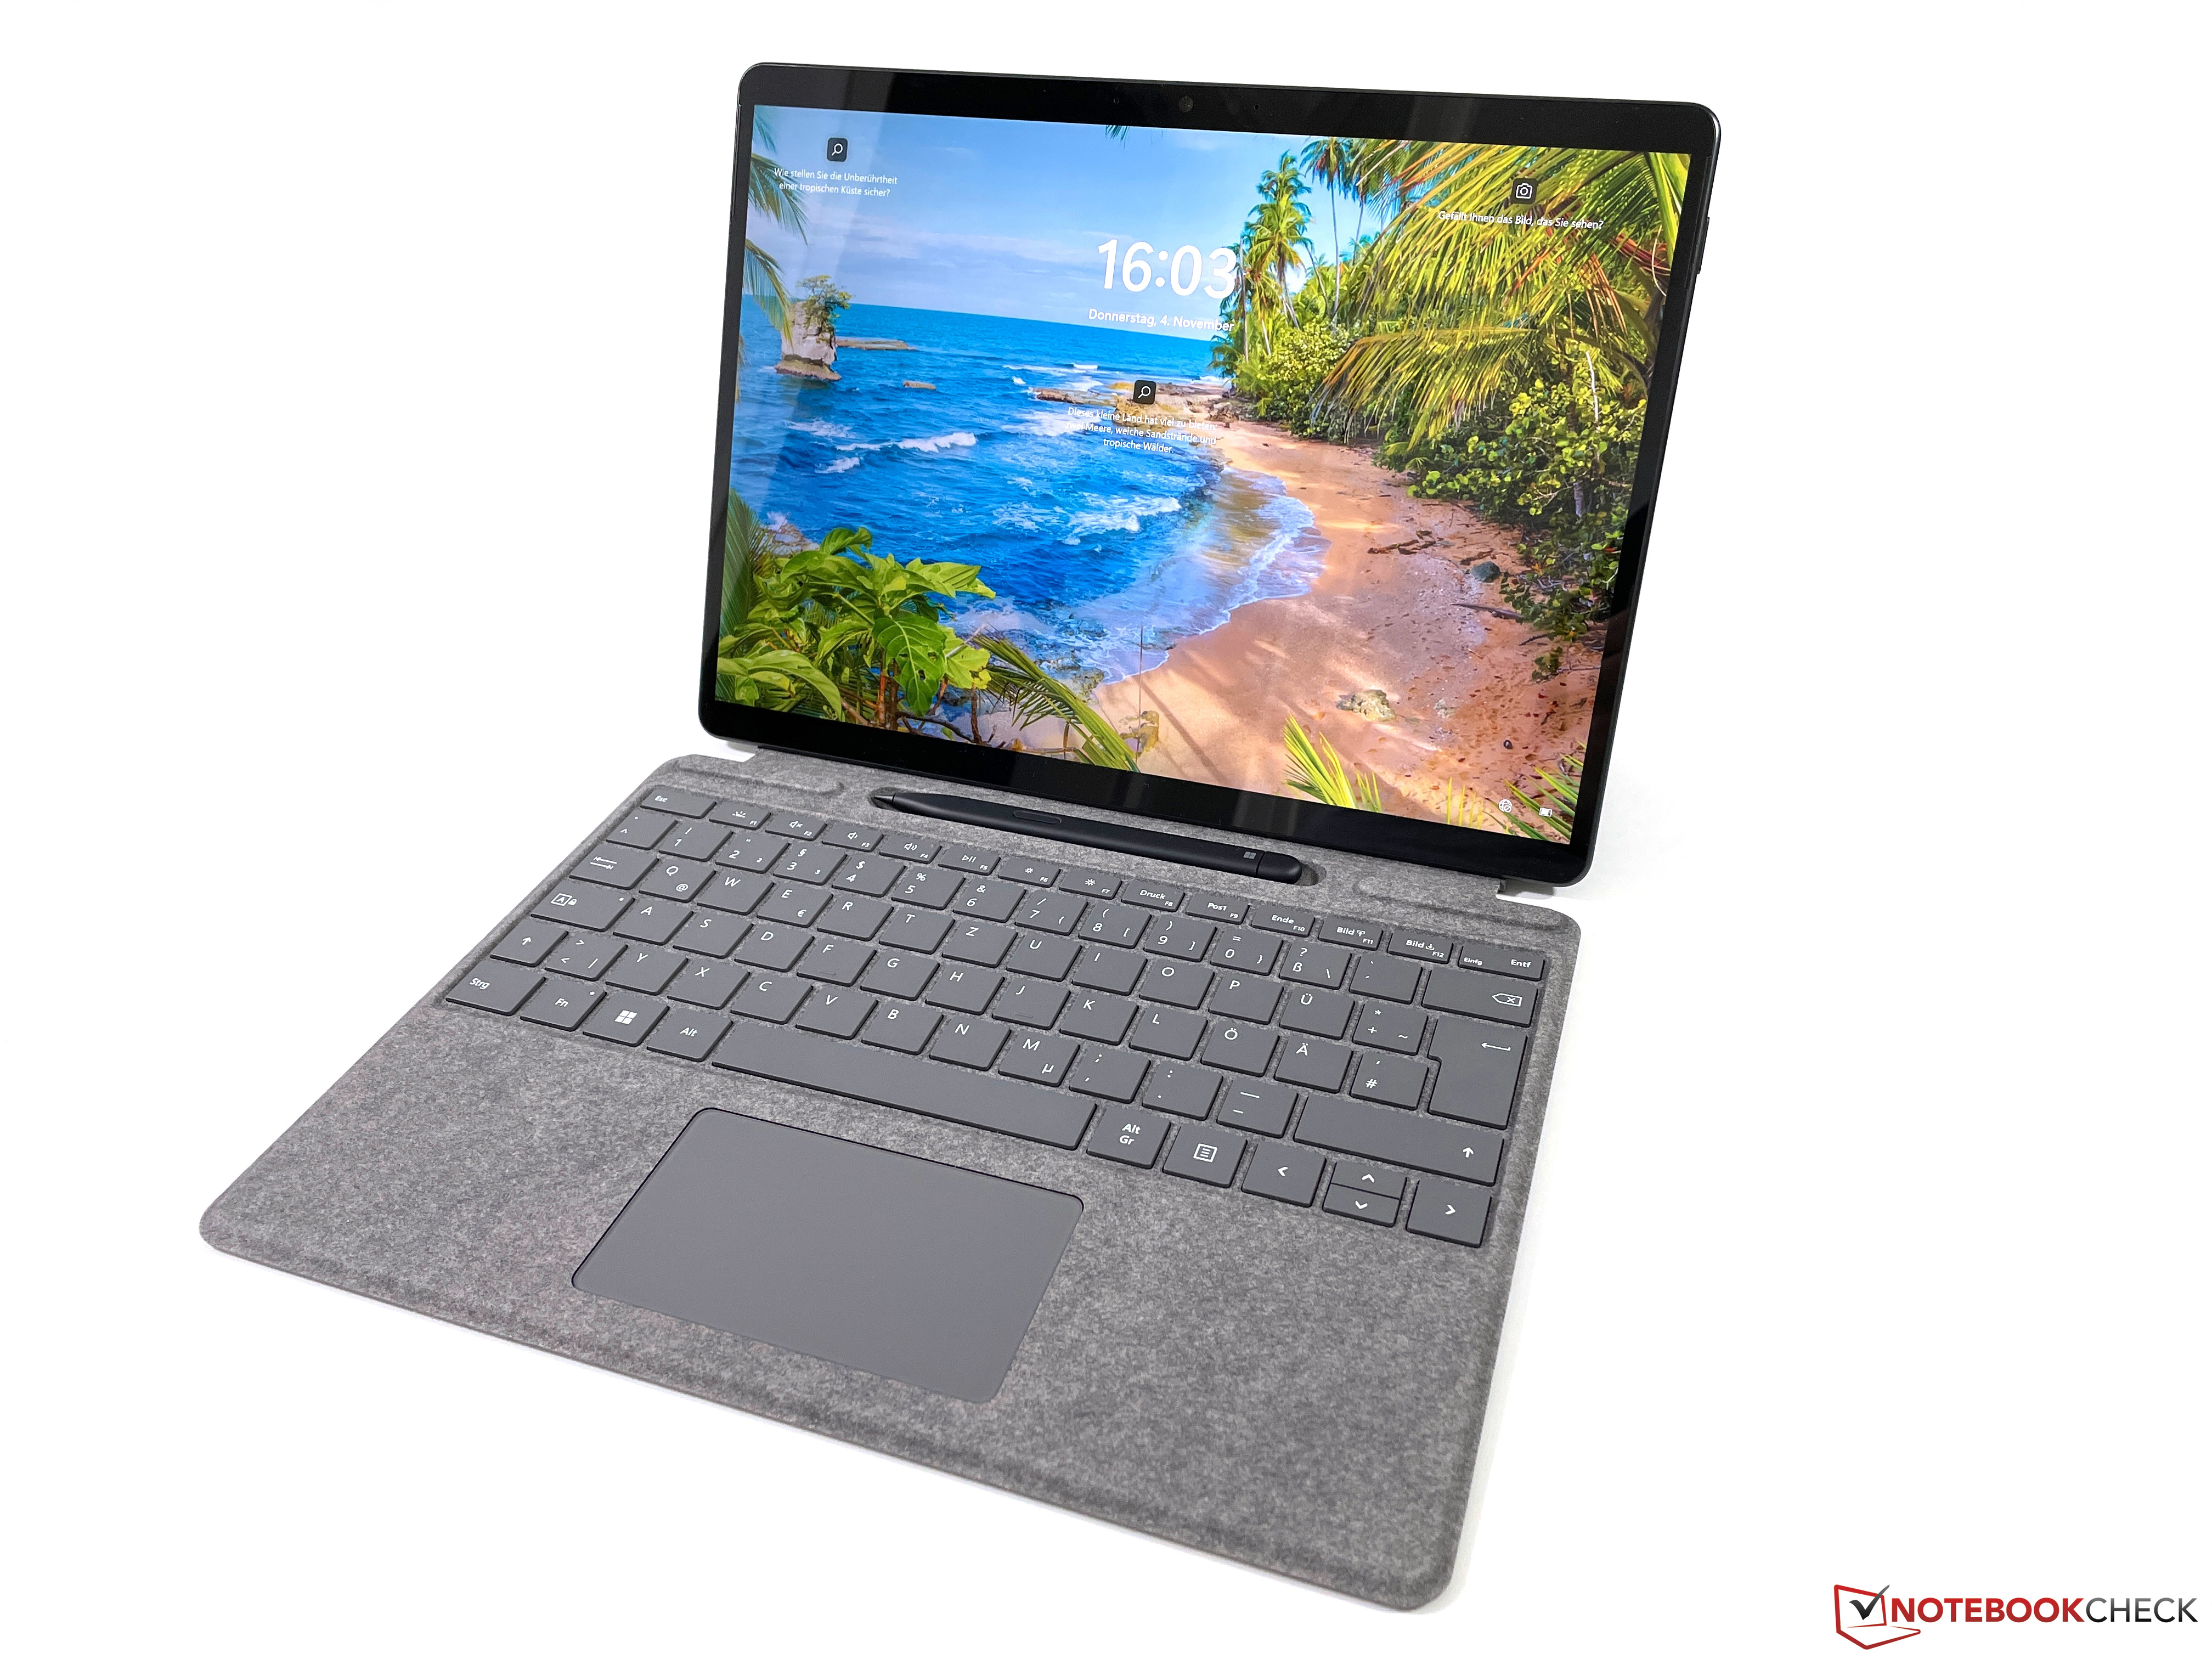 Microsoft Surface Hz 120 - 8 finally and Pro Review: Thunderbolt NotebookCheck.net Powerful, Reviews Convertible